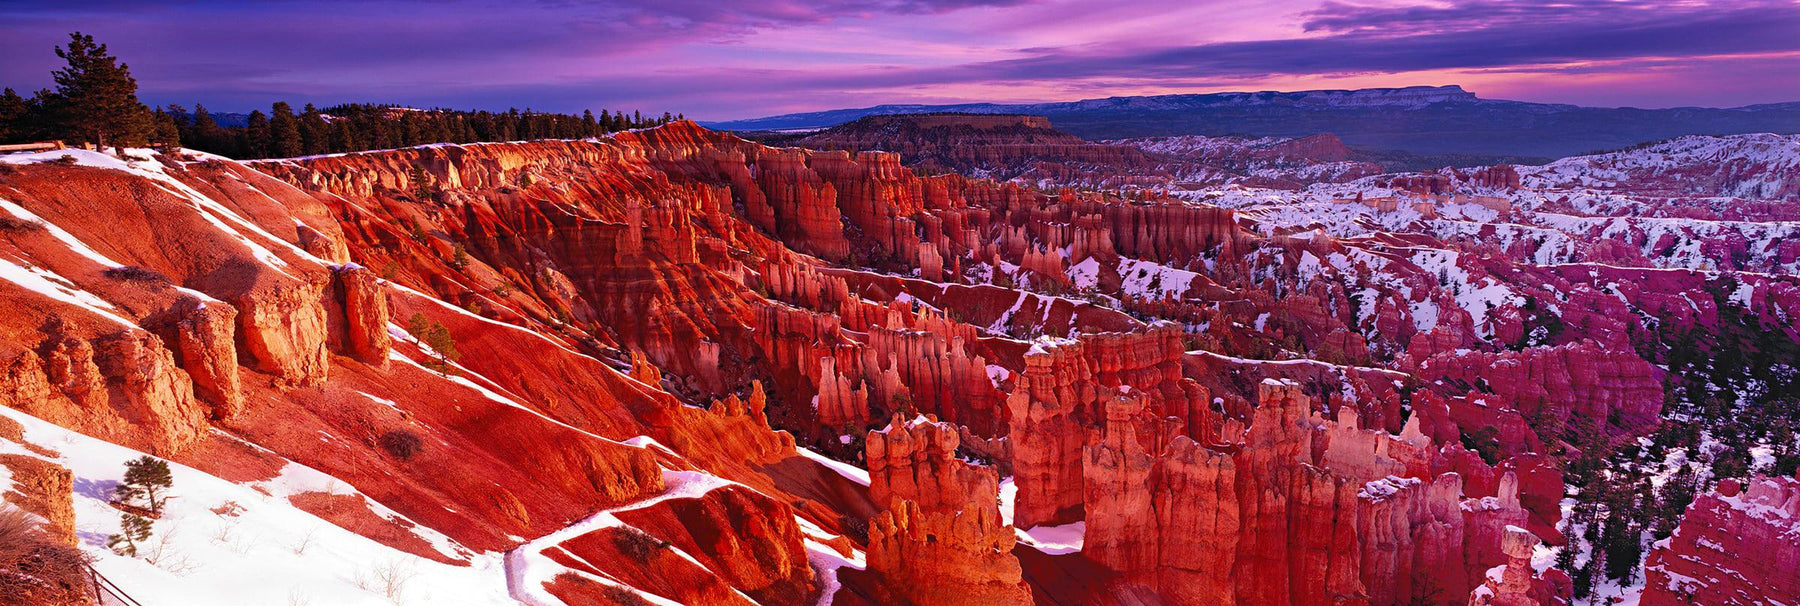 Snow covered red rock hoodoos and forest of Bryce Canyon Utah at sunset